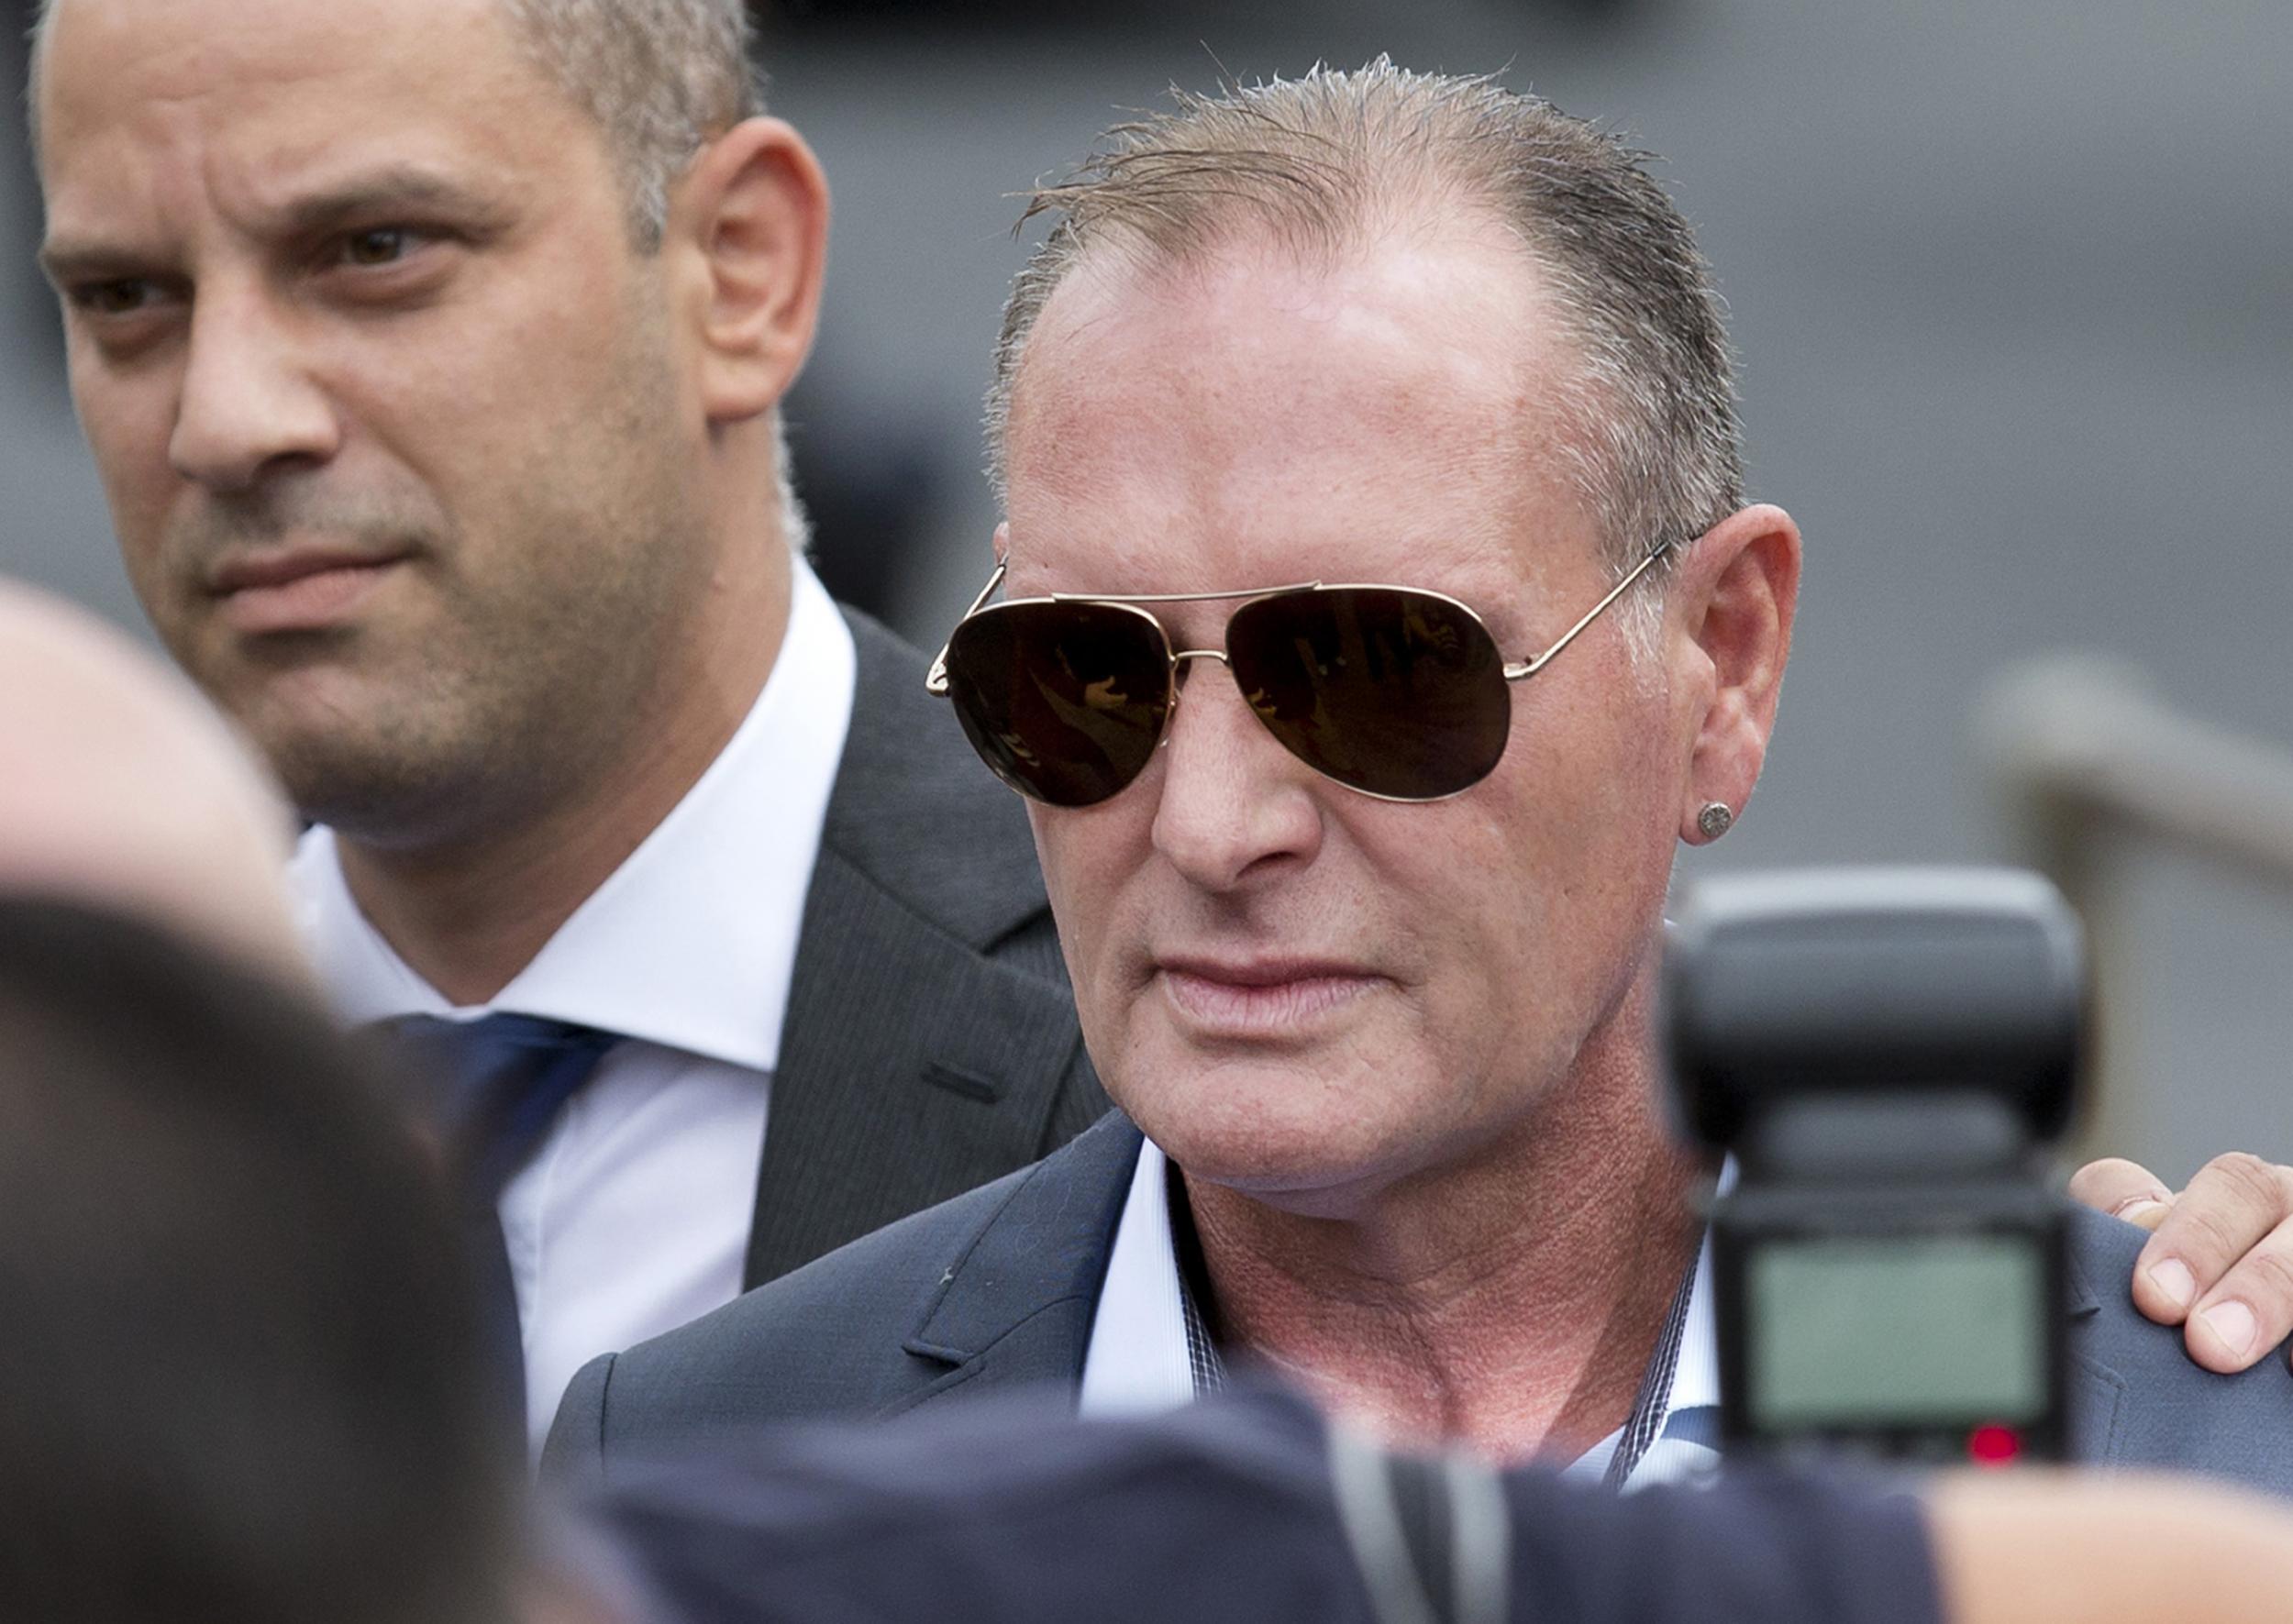 Paul Gascoigne arrives at Stevenage Magistrates Court in 2013, where he pleaded guilty to common assault and drunk and disorderly behaviour at a train station